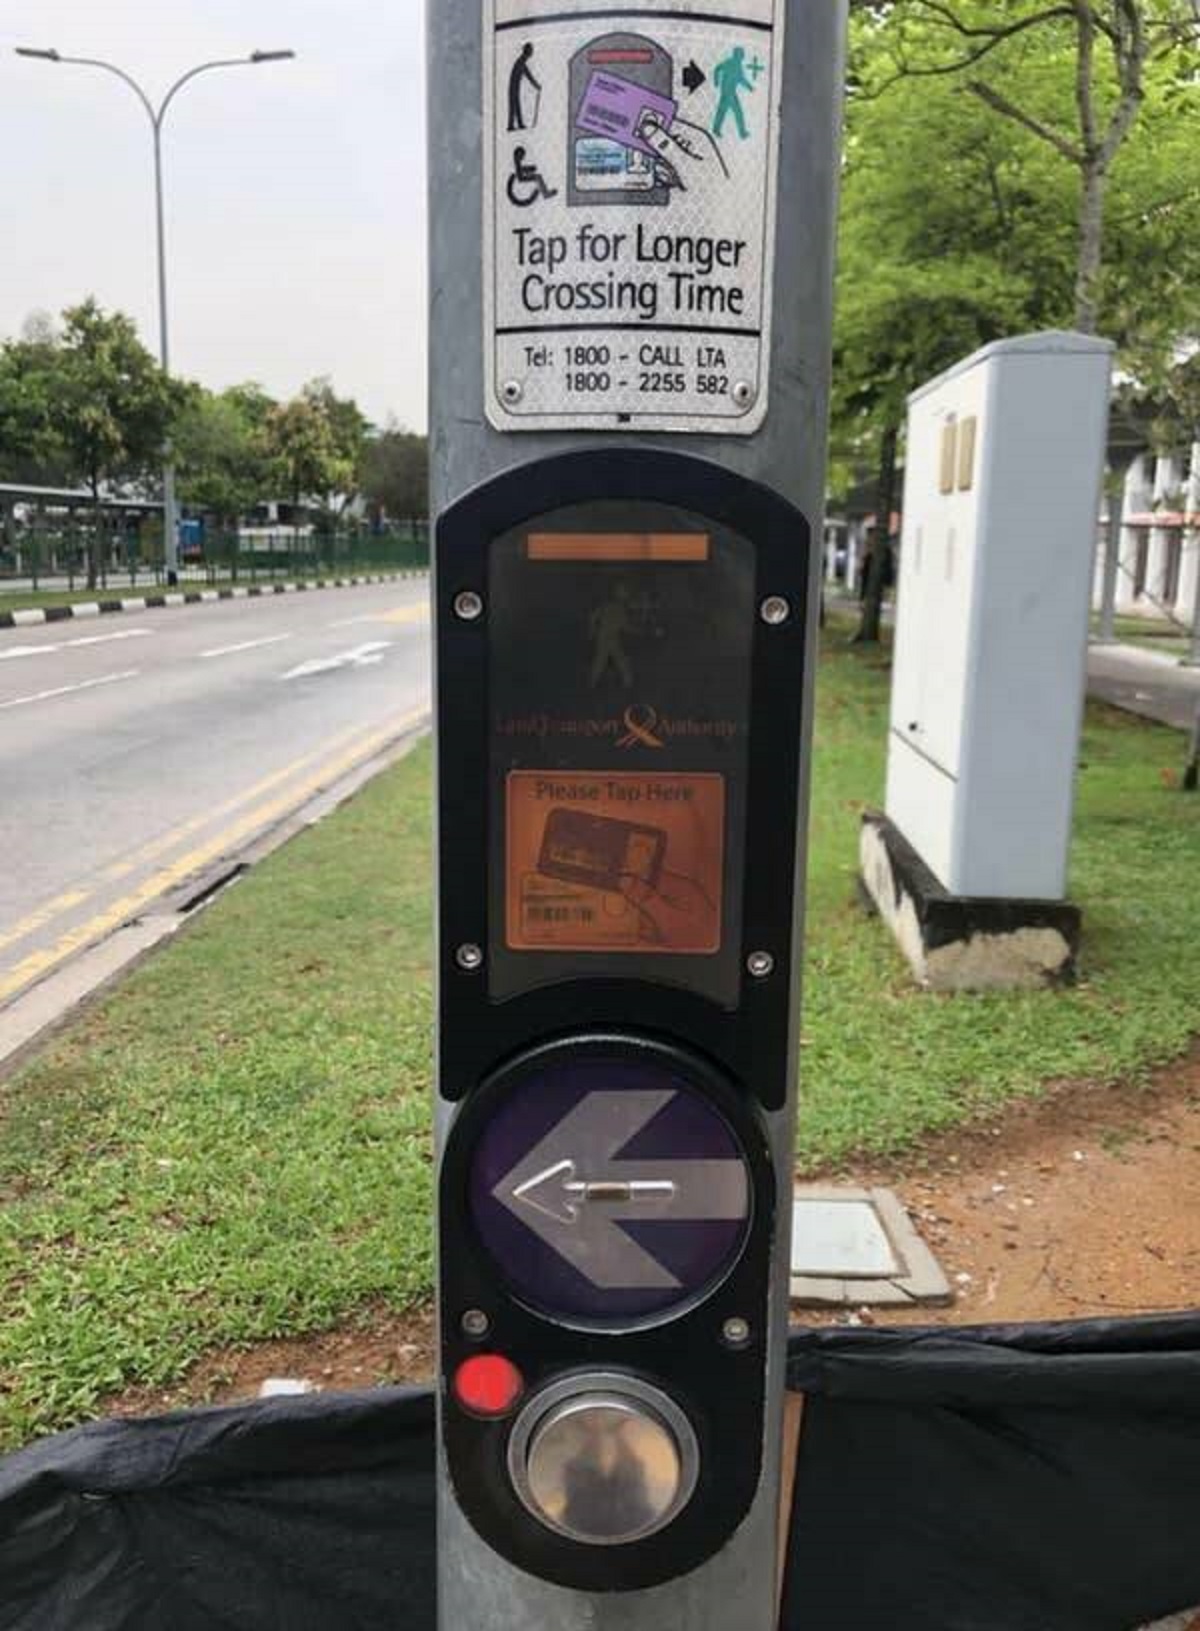 In Singapore, if you're older or have a disability, you receive a card you can scan that gives you a longer time to cross the street.